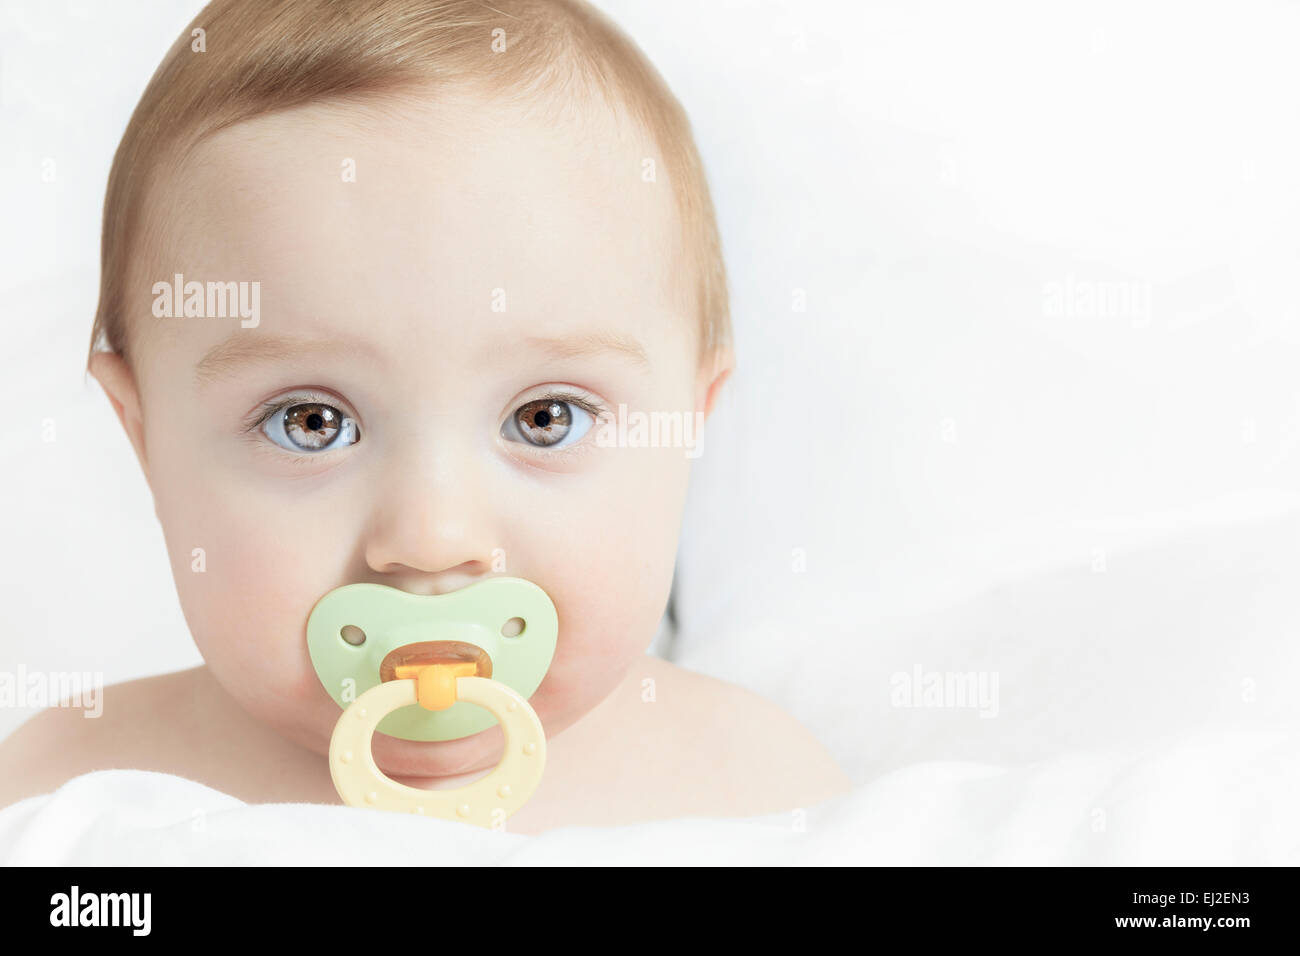 Baby portrait on the bed with white background Stock Photo